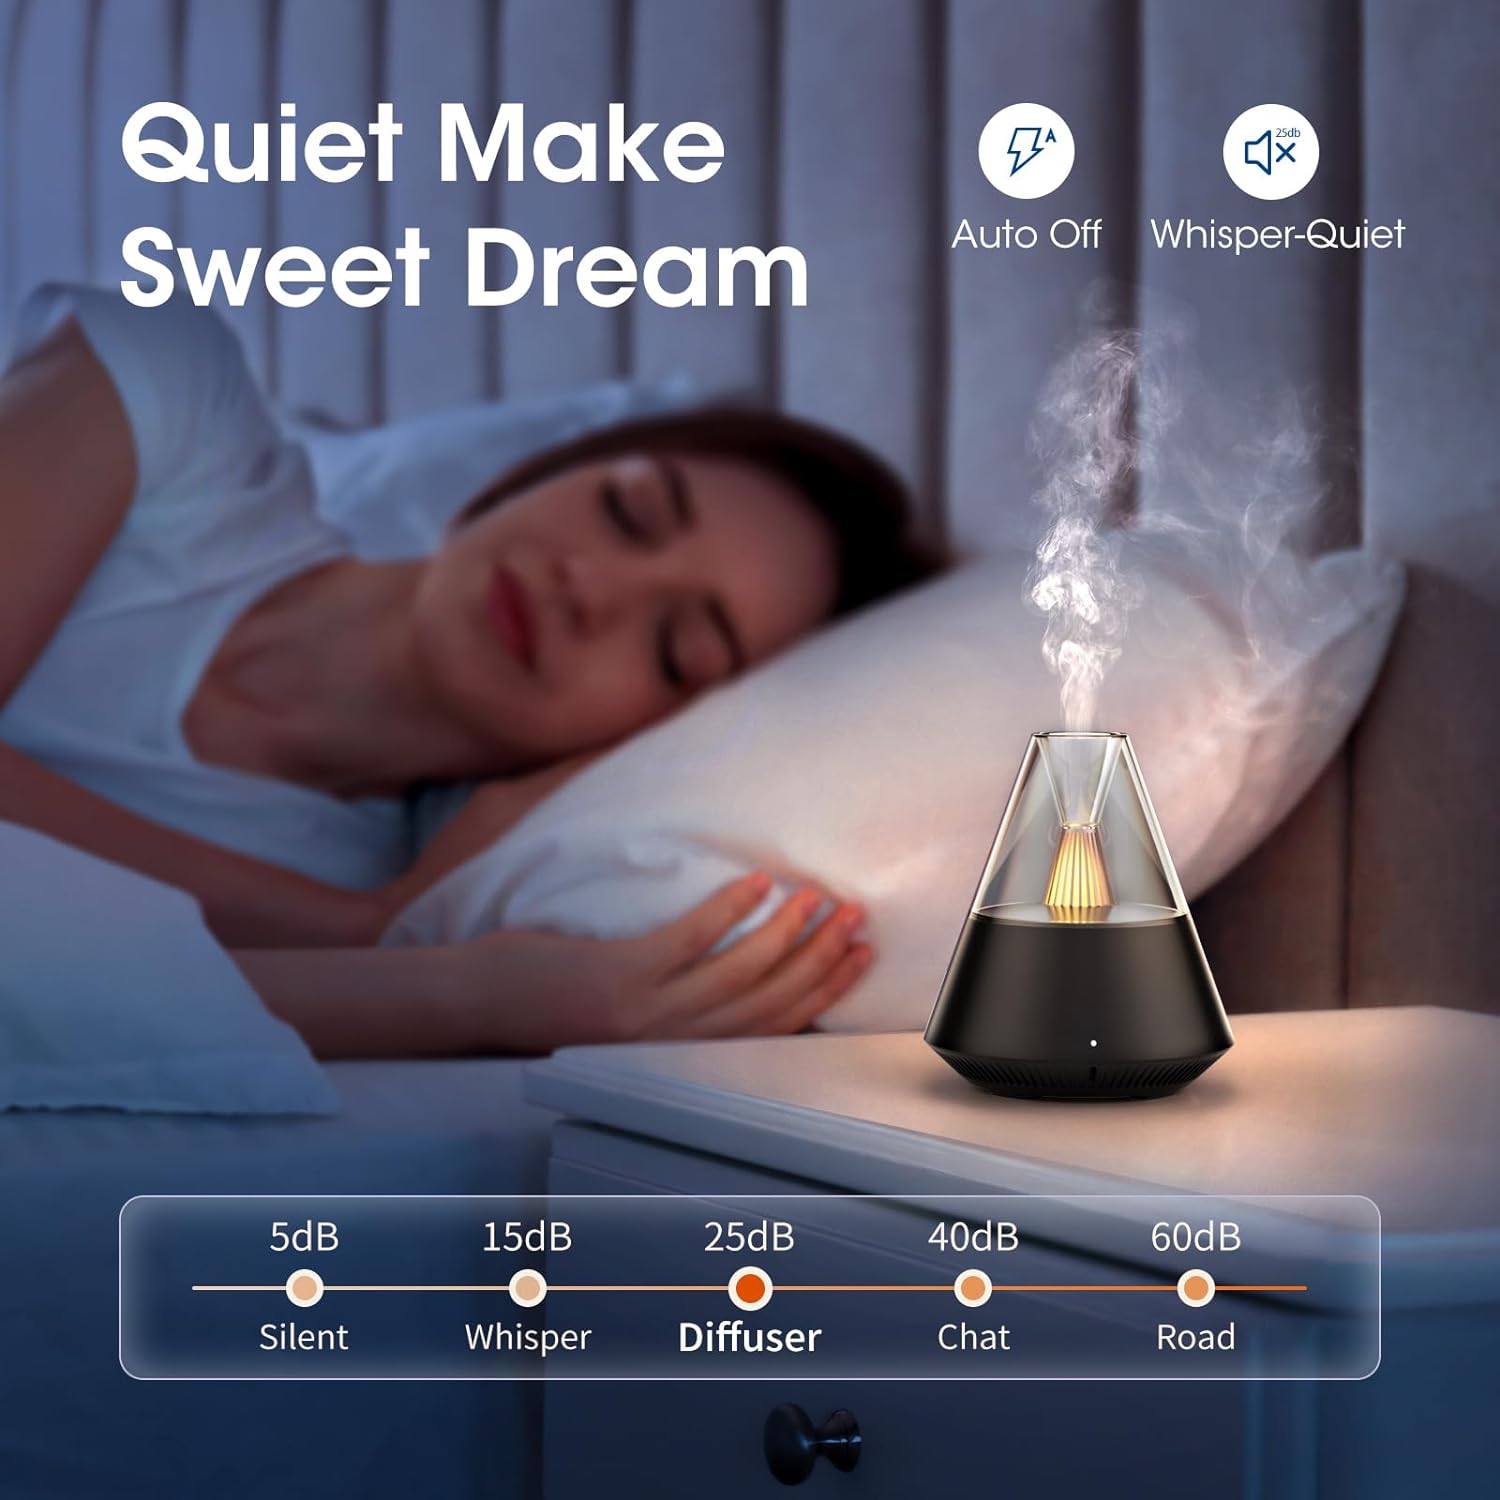 A woman sleeps peacefully next to a quiet Essential Oil Diffuser SpyCam with a noise level chart indicating it operates at a whisper-quiet volume.